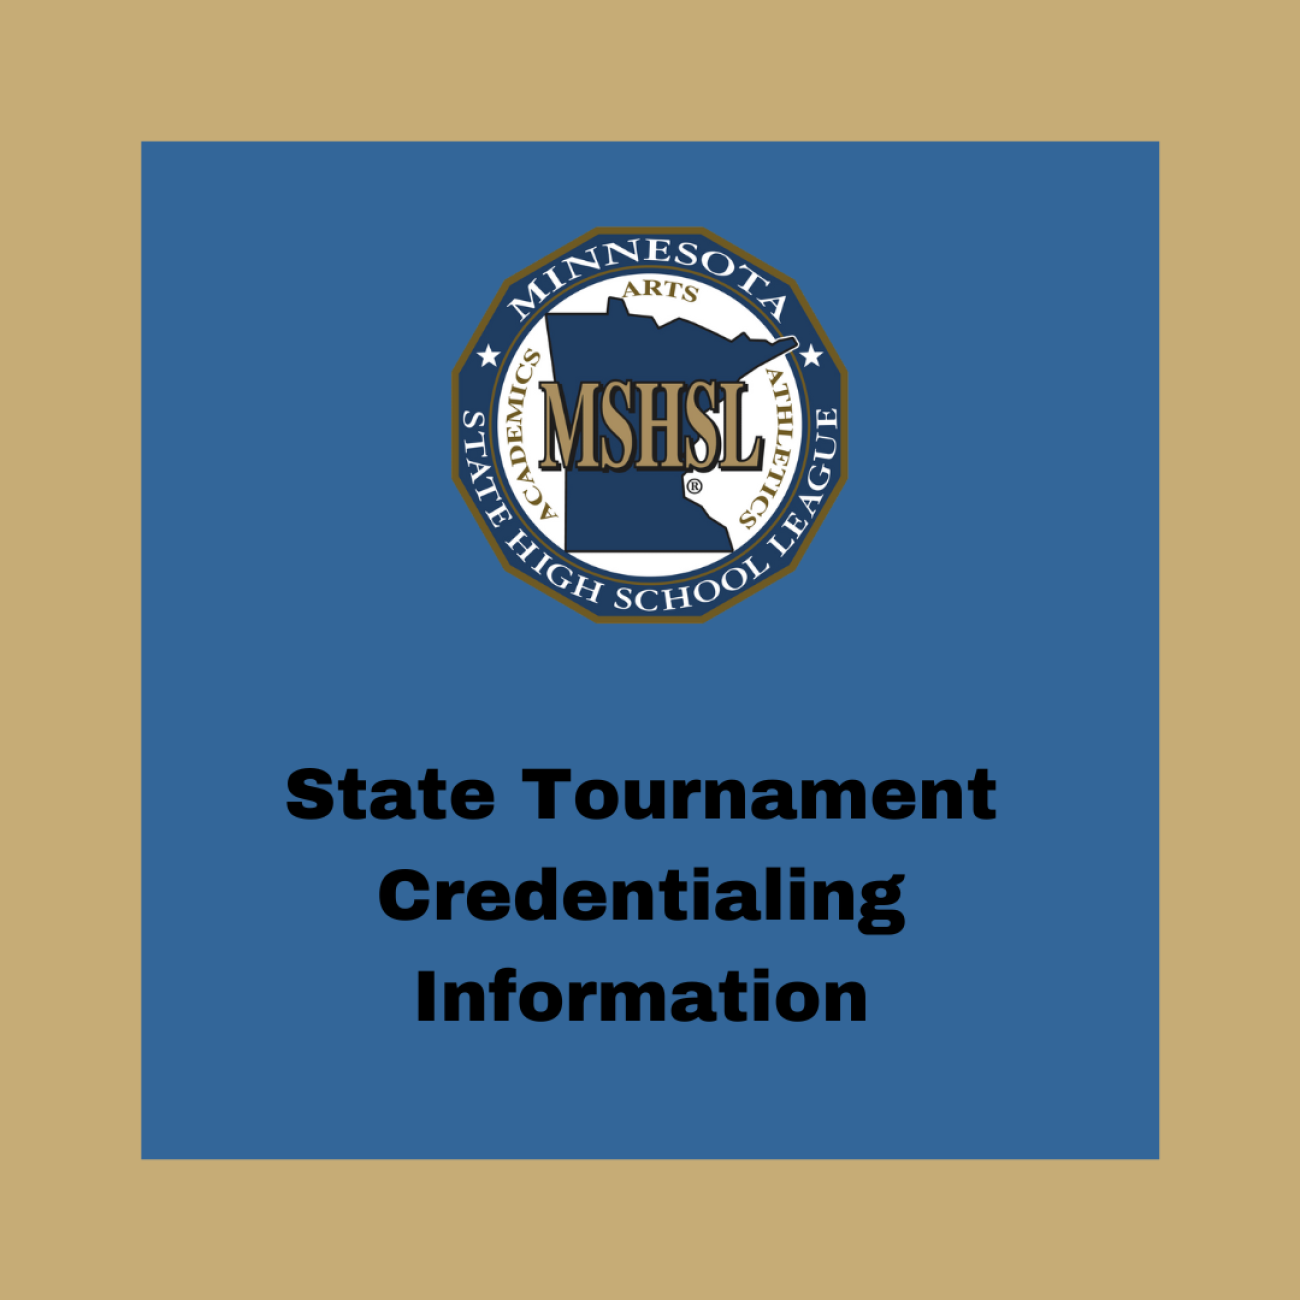 State Tournament Credentialing Information